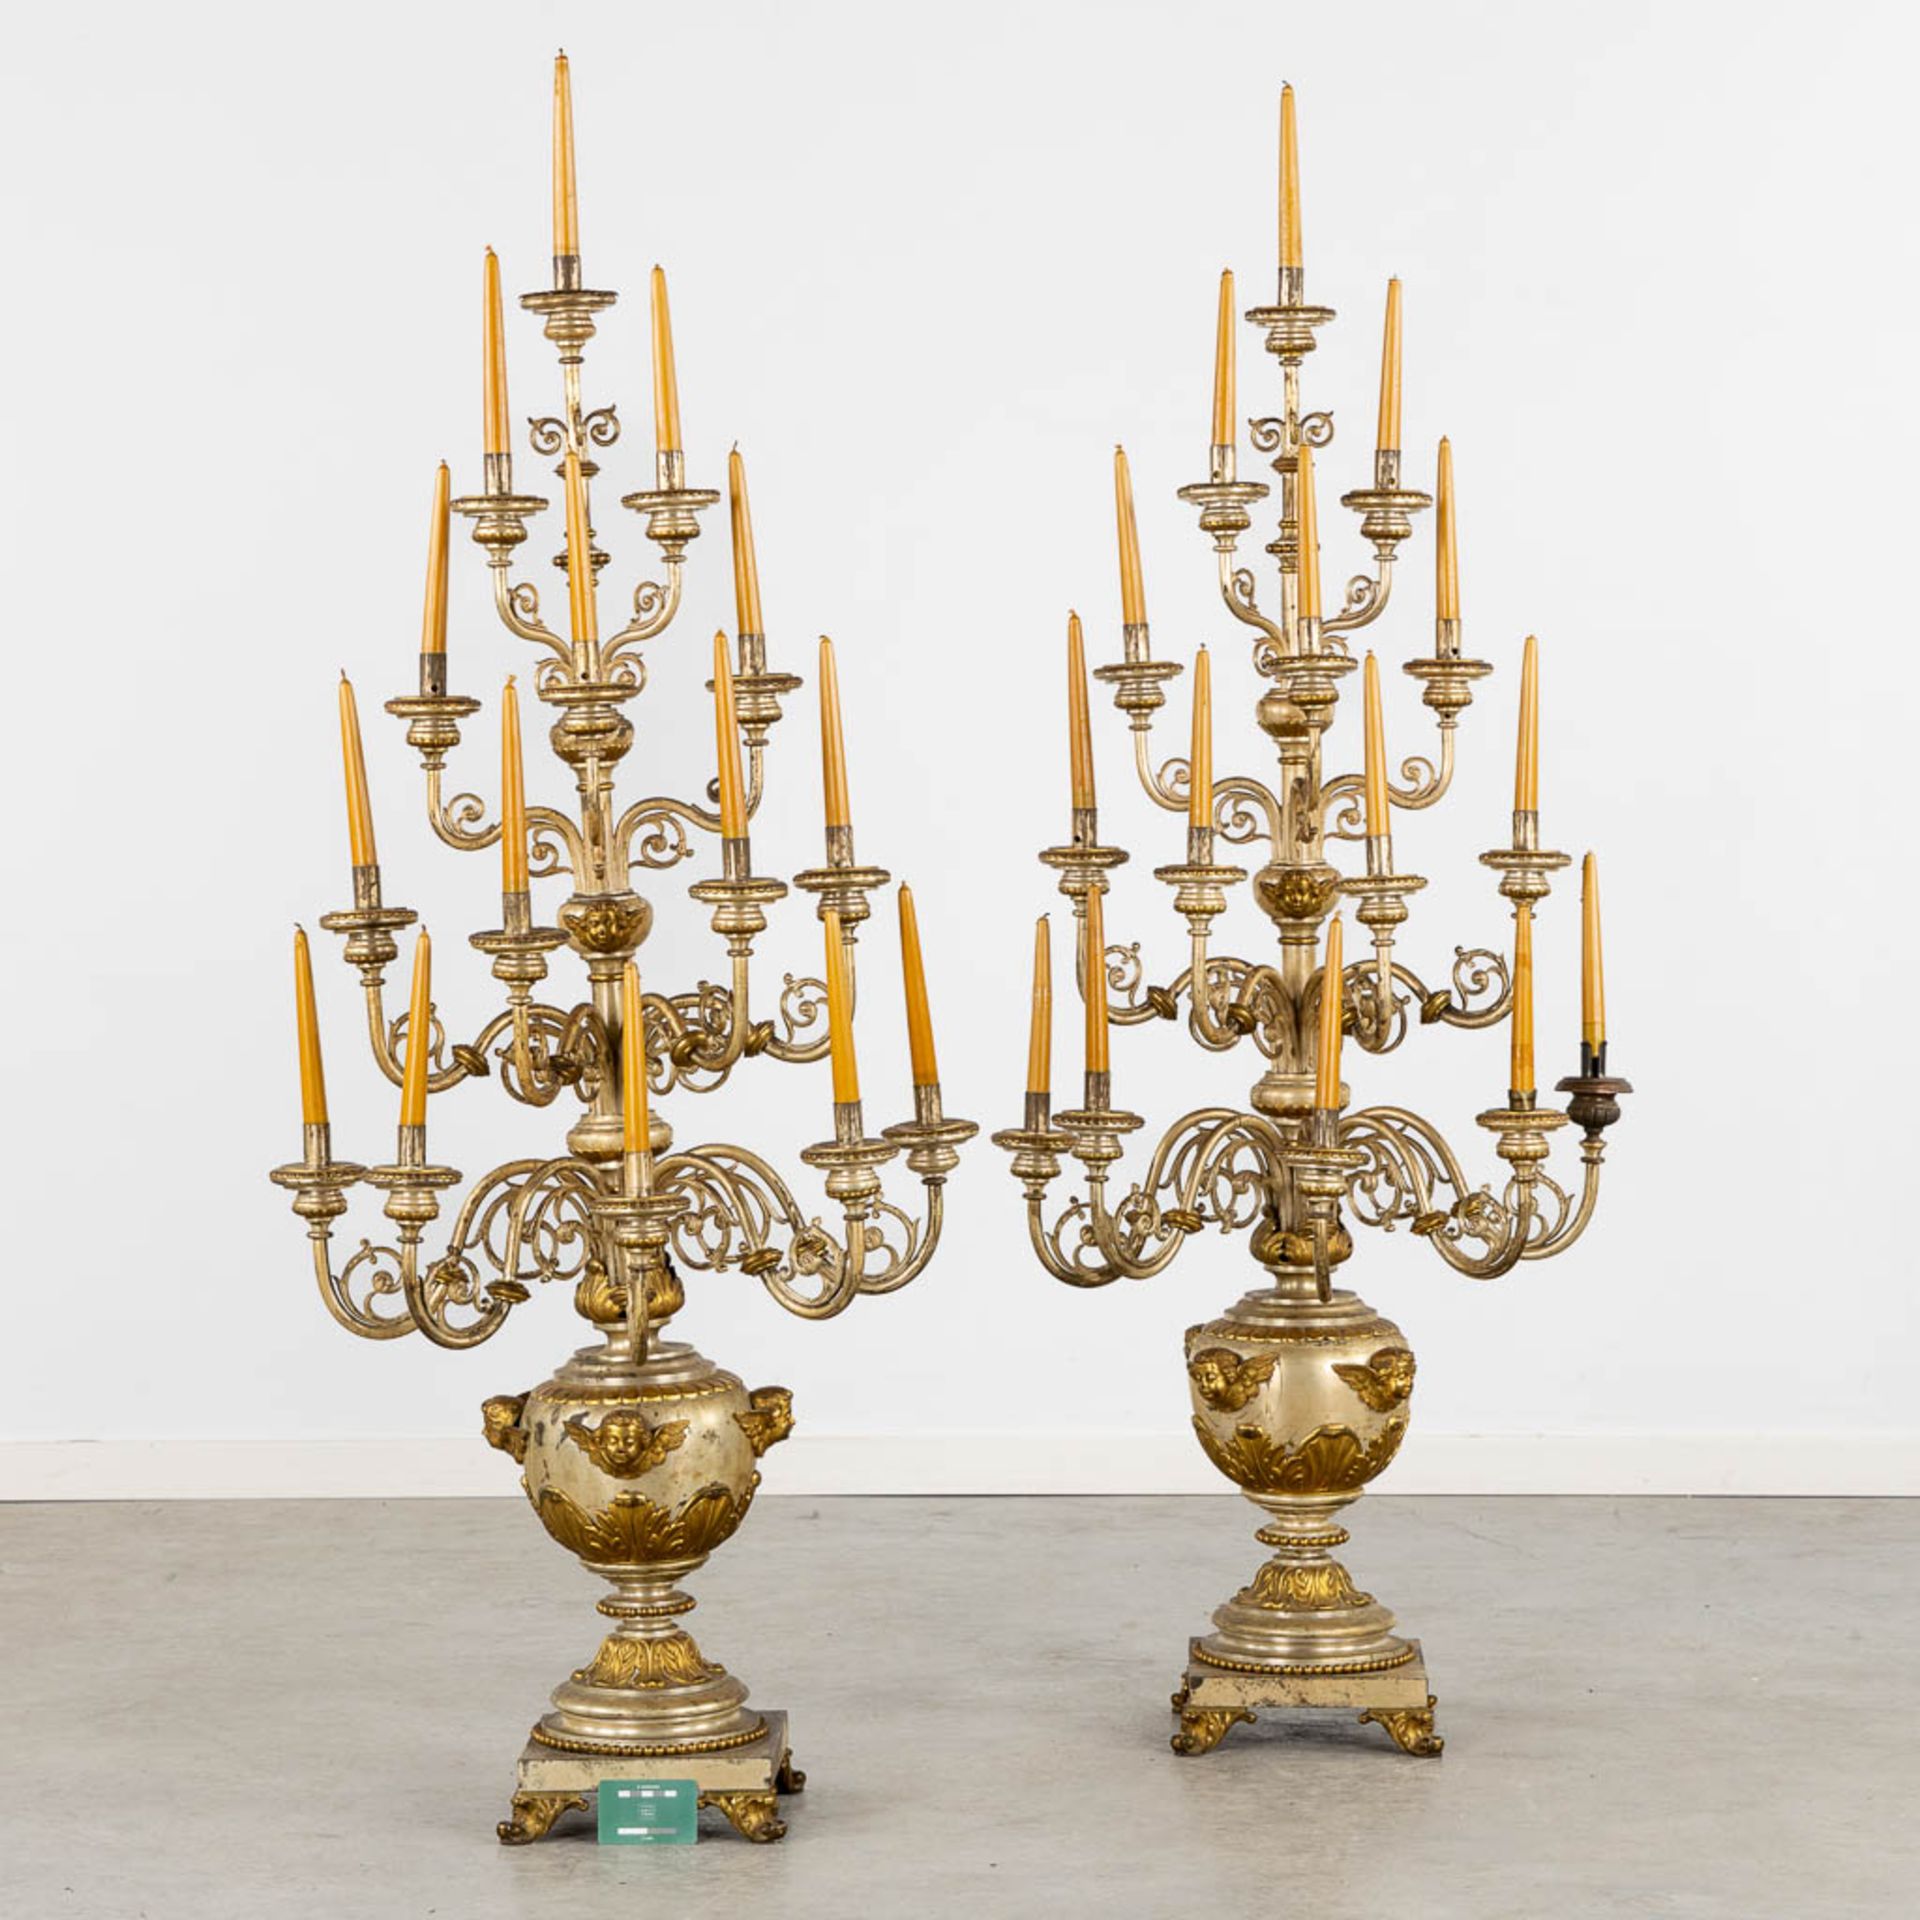 An impressive pair of candelabra, 15 candles, gold and silver-plated metal. (L:44 x W:60 x H:138 cm) - Bild 2 aus 12